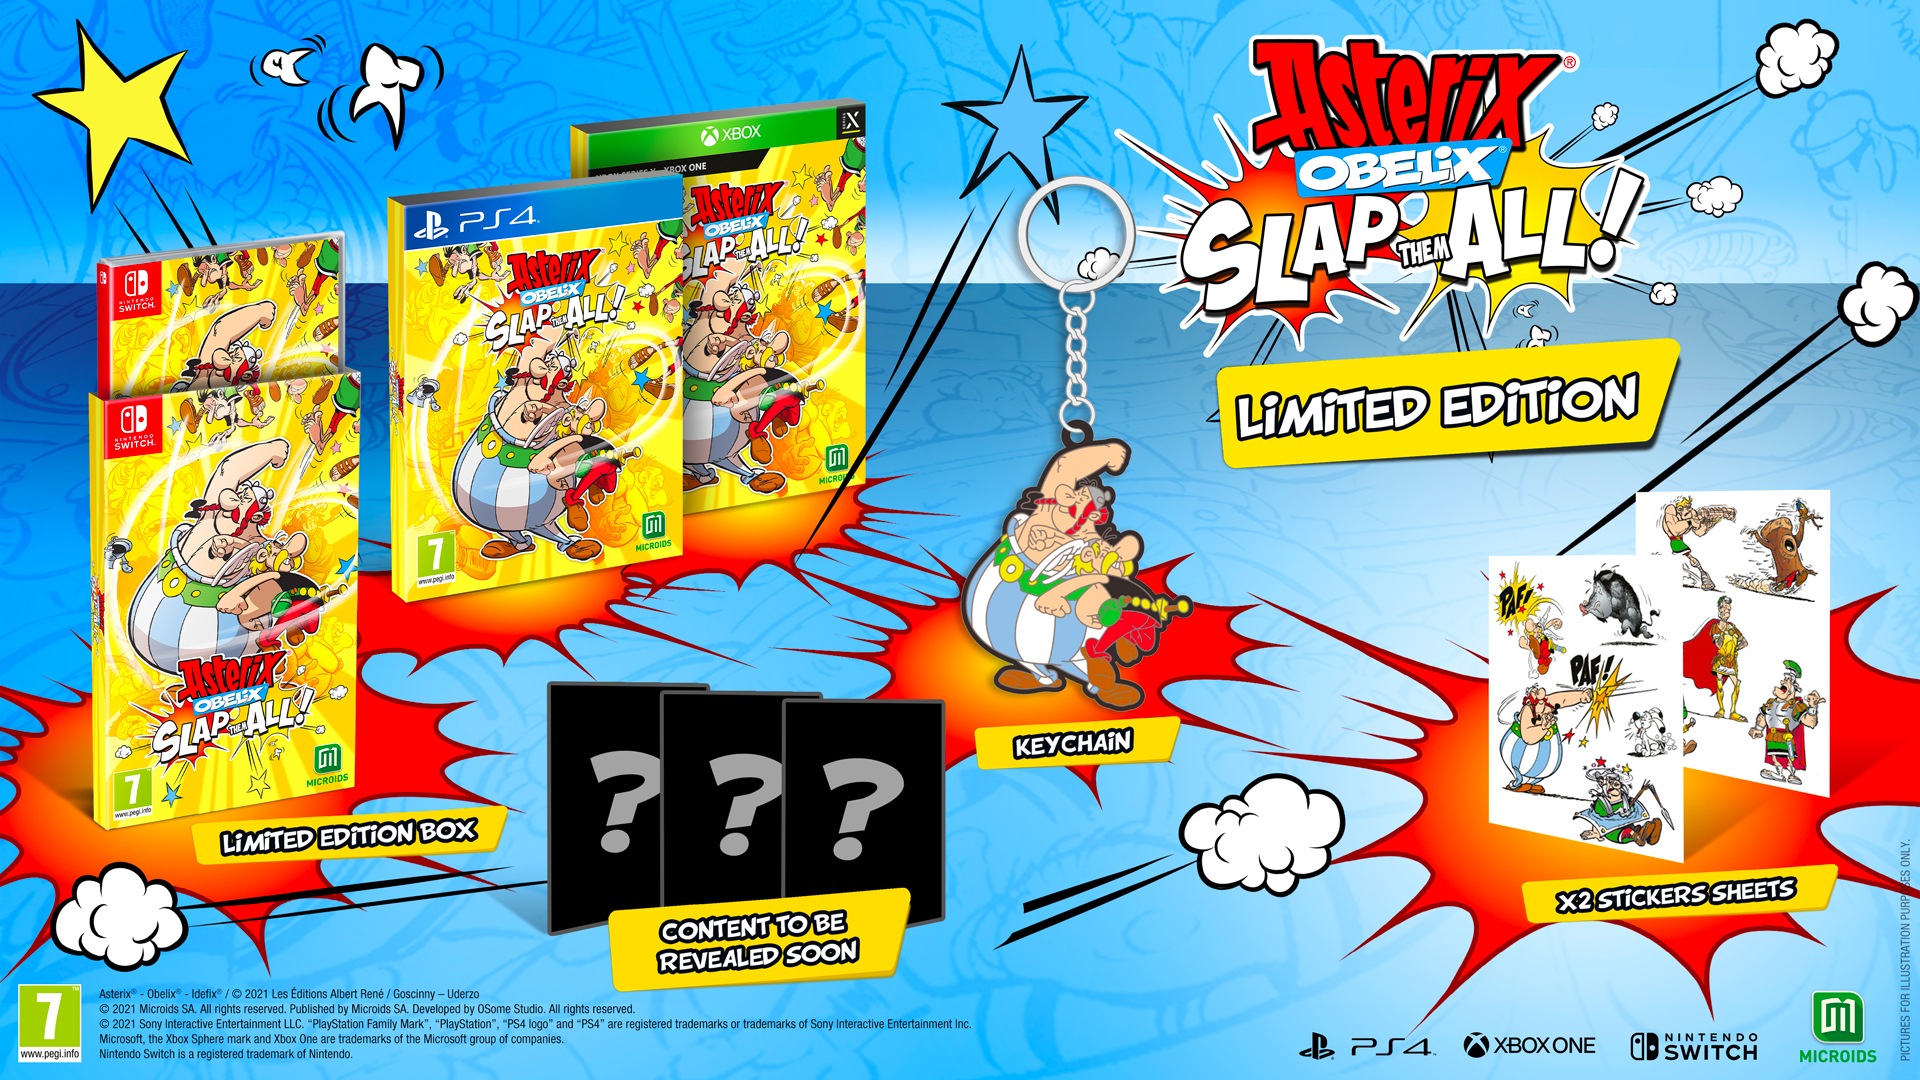 Microids on Twitter: "Discover the collector's and limited edition of the  game Asterix & Obelix: Slap them All! Asterix & Obelix: Slap them All! will  launch in Fall 2021 on PS4, Xbox